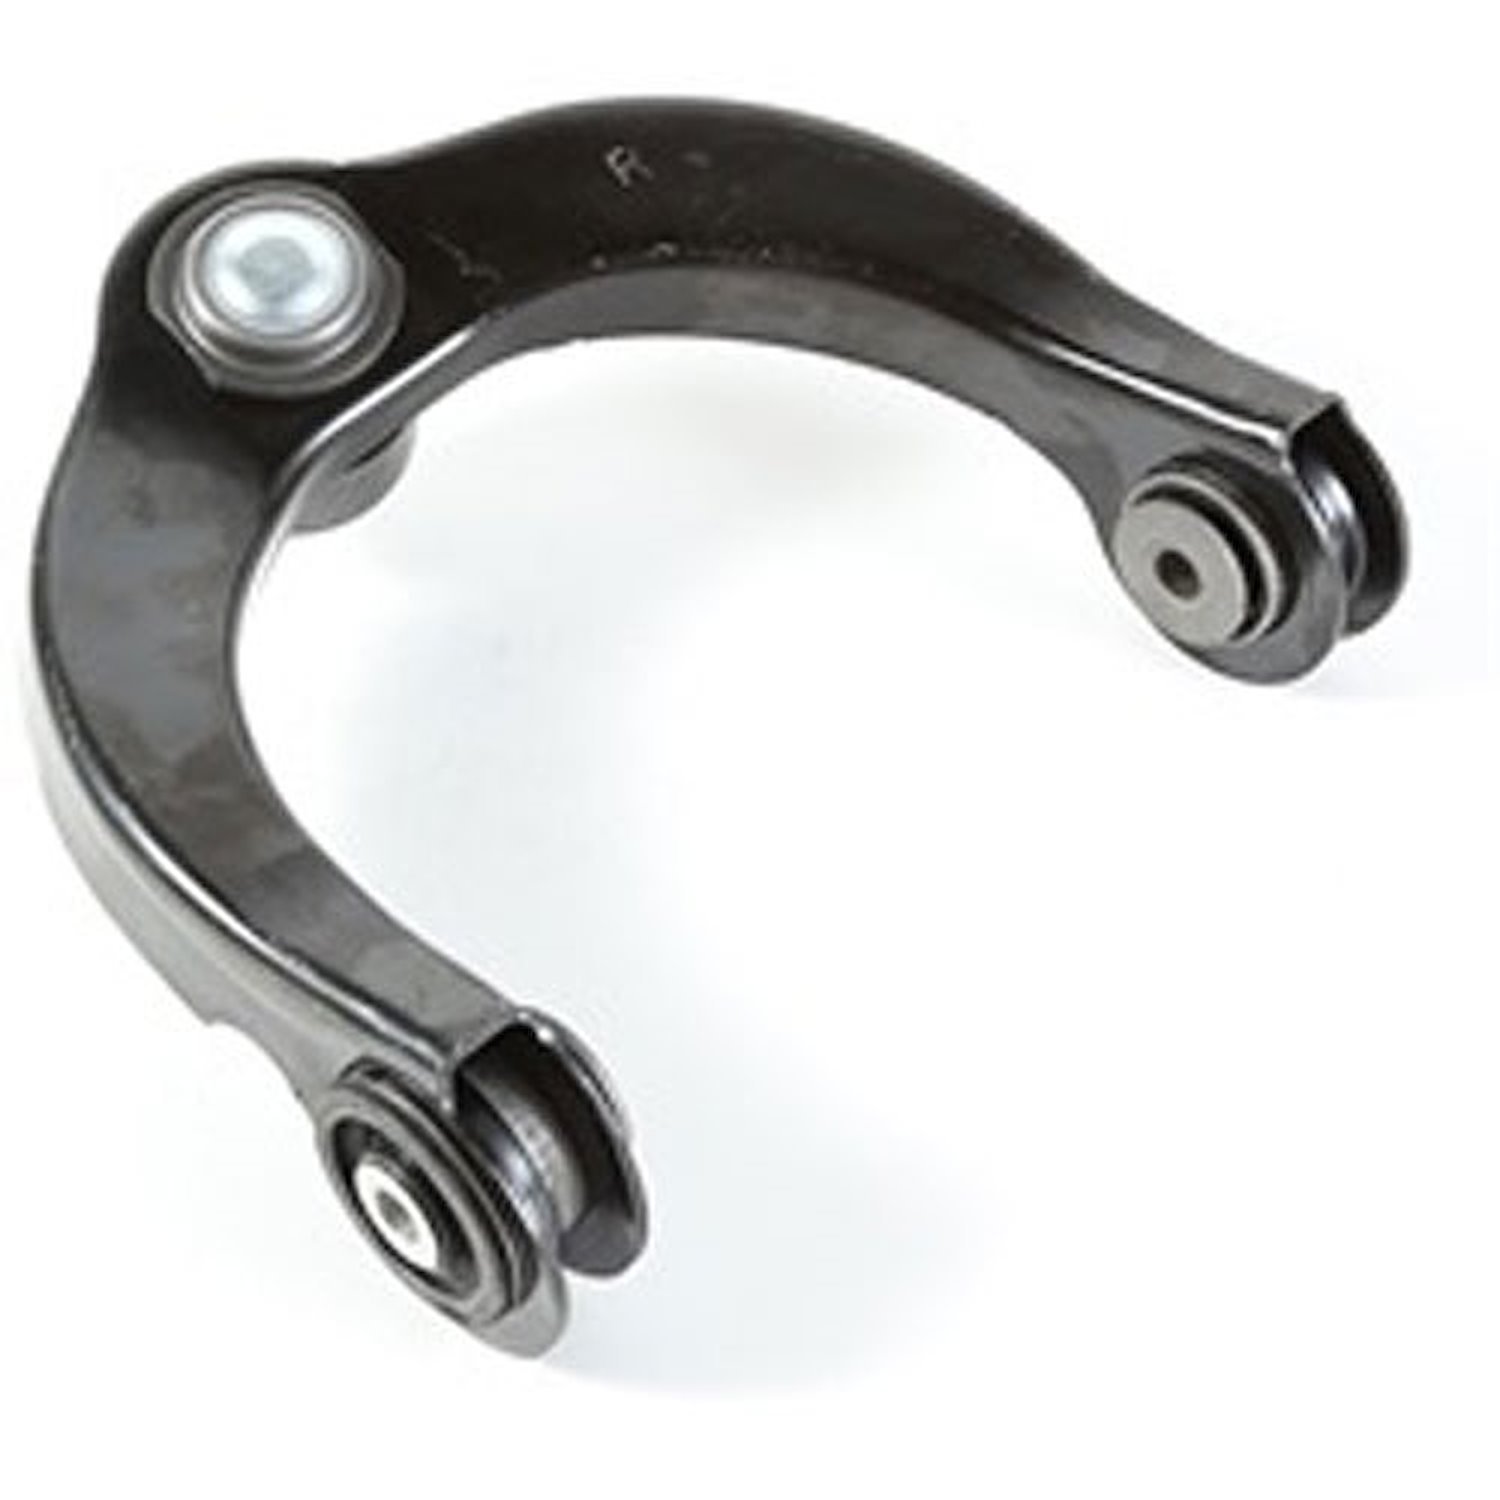 This right front upper control arm from Omix-ADA fits 11-16 Jeep Grand Cherokees. Includes ball joint.